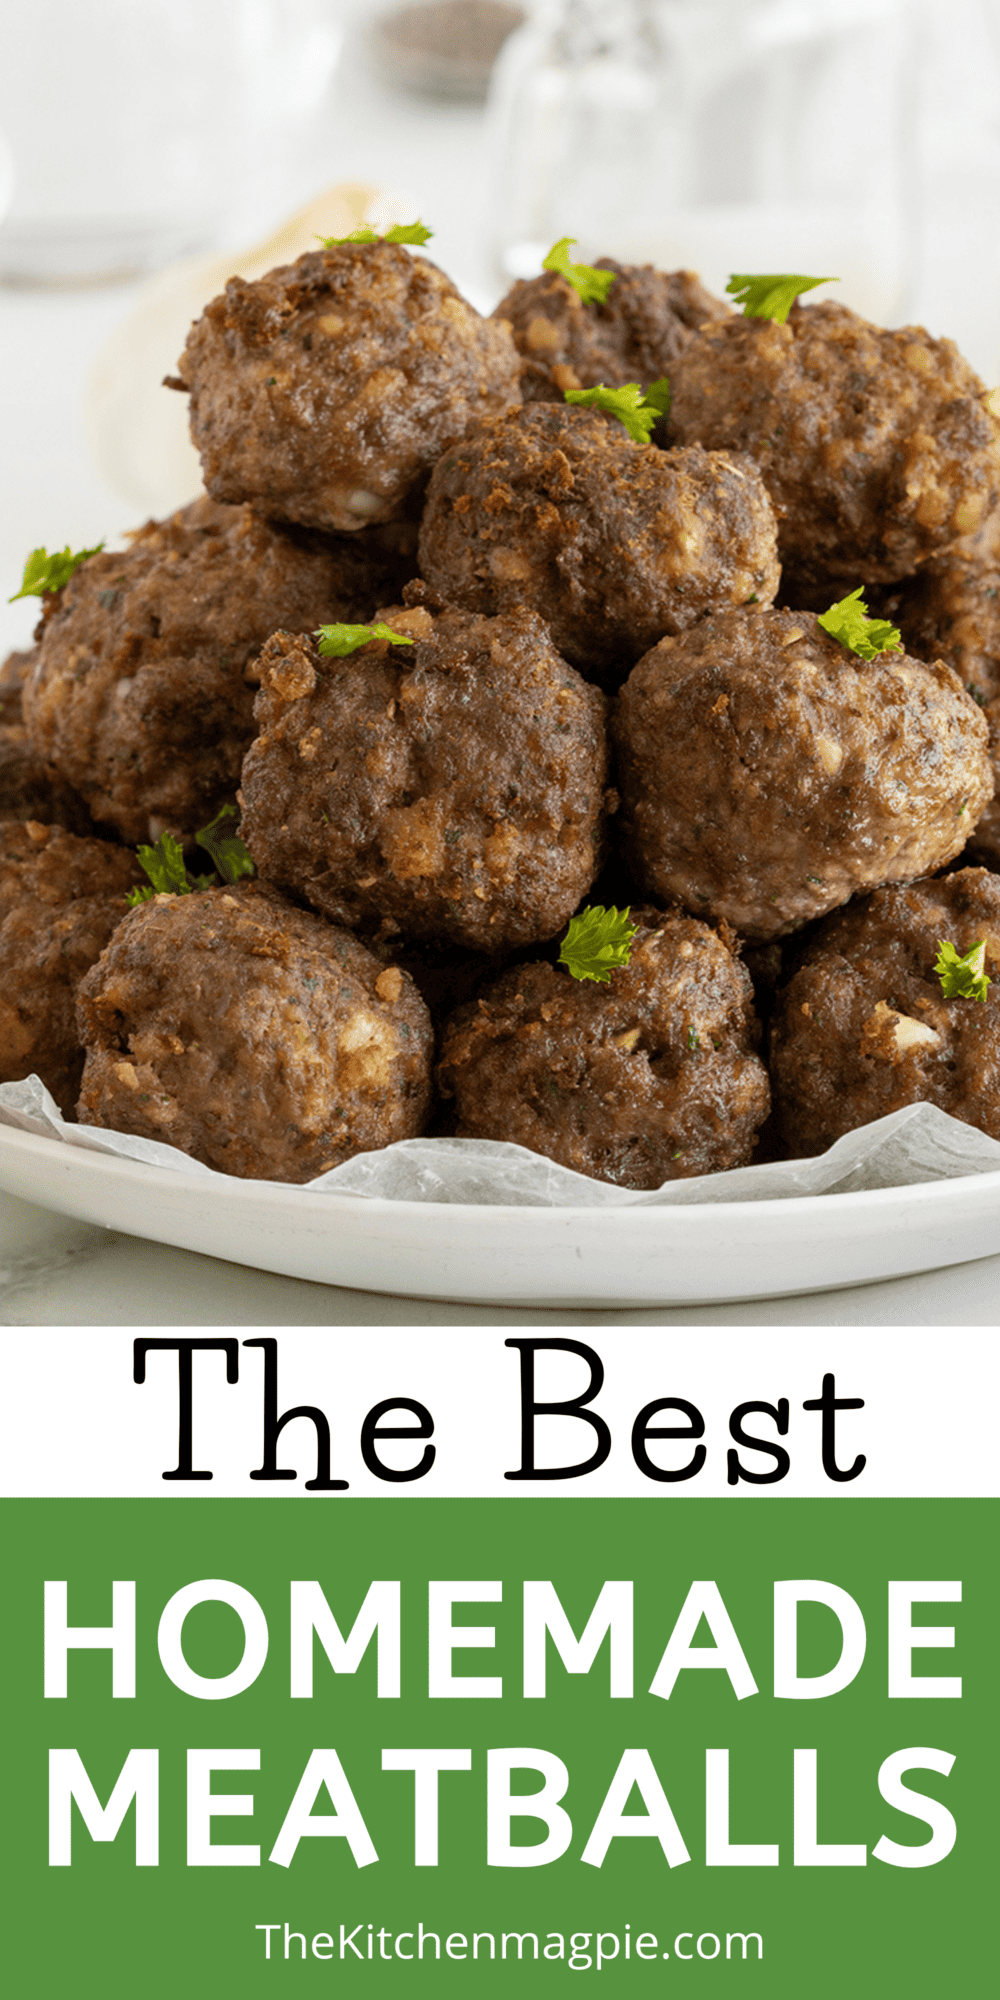 How to make delicious homemade meatballs in a big batch that you can then freeze and use for meals later on!